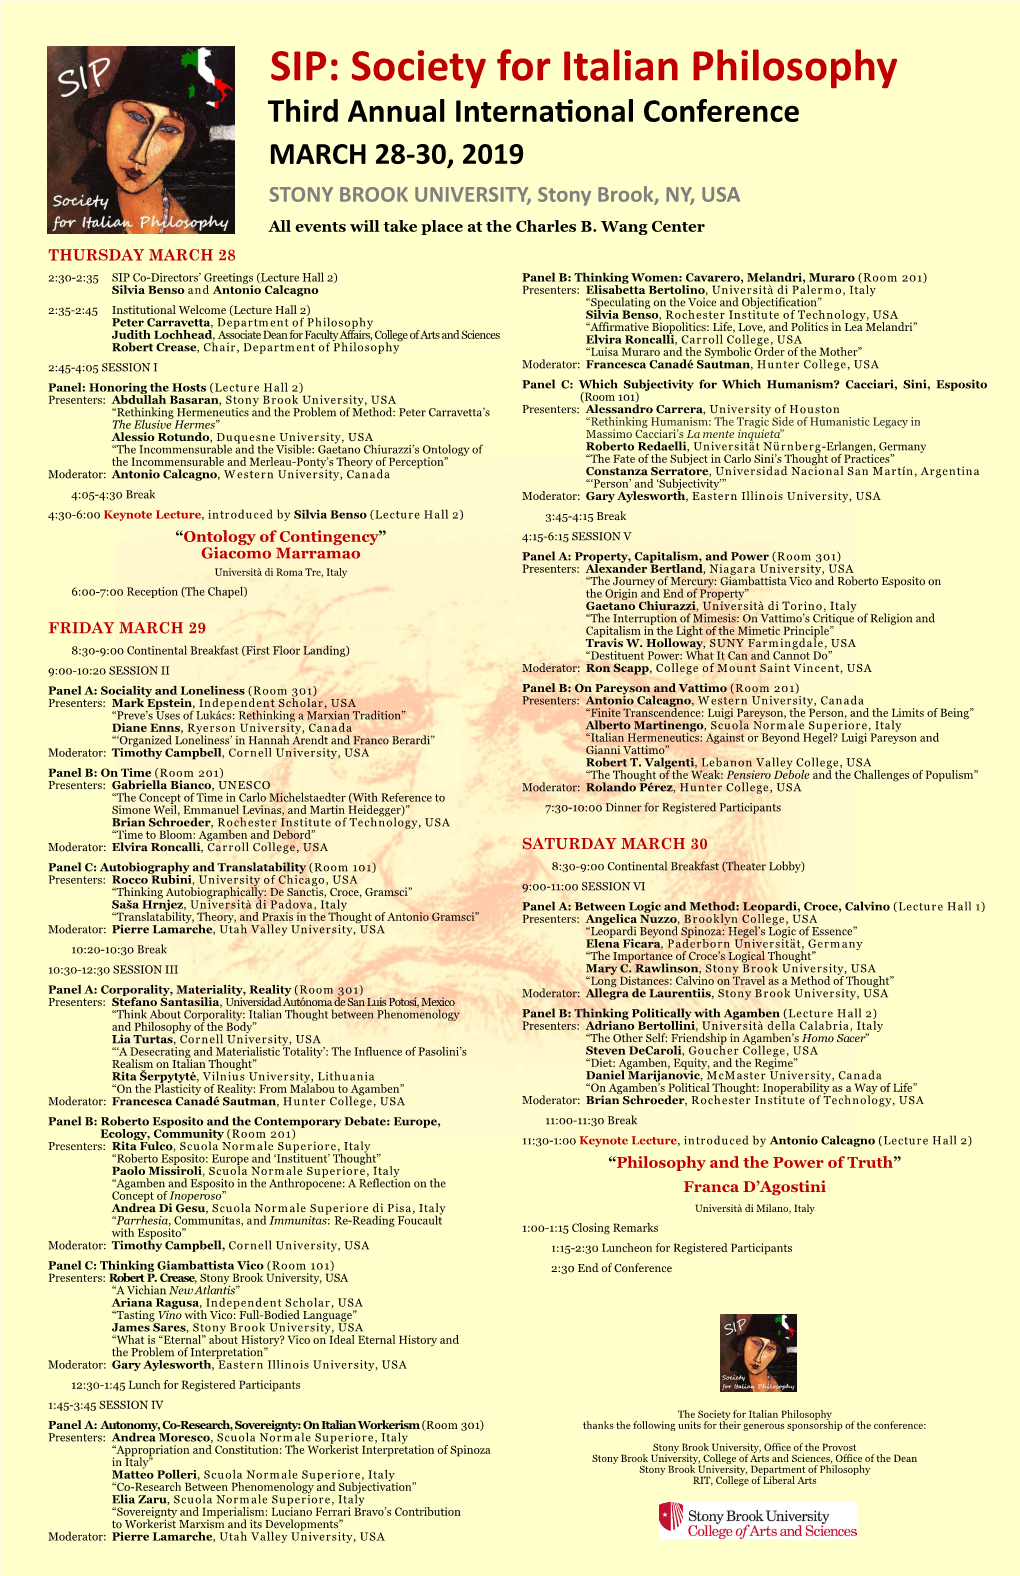 SIP: Society for Italian Philosophy Third Annual International Conference MARCH 28-30, 2019